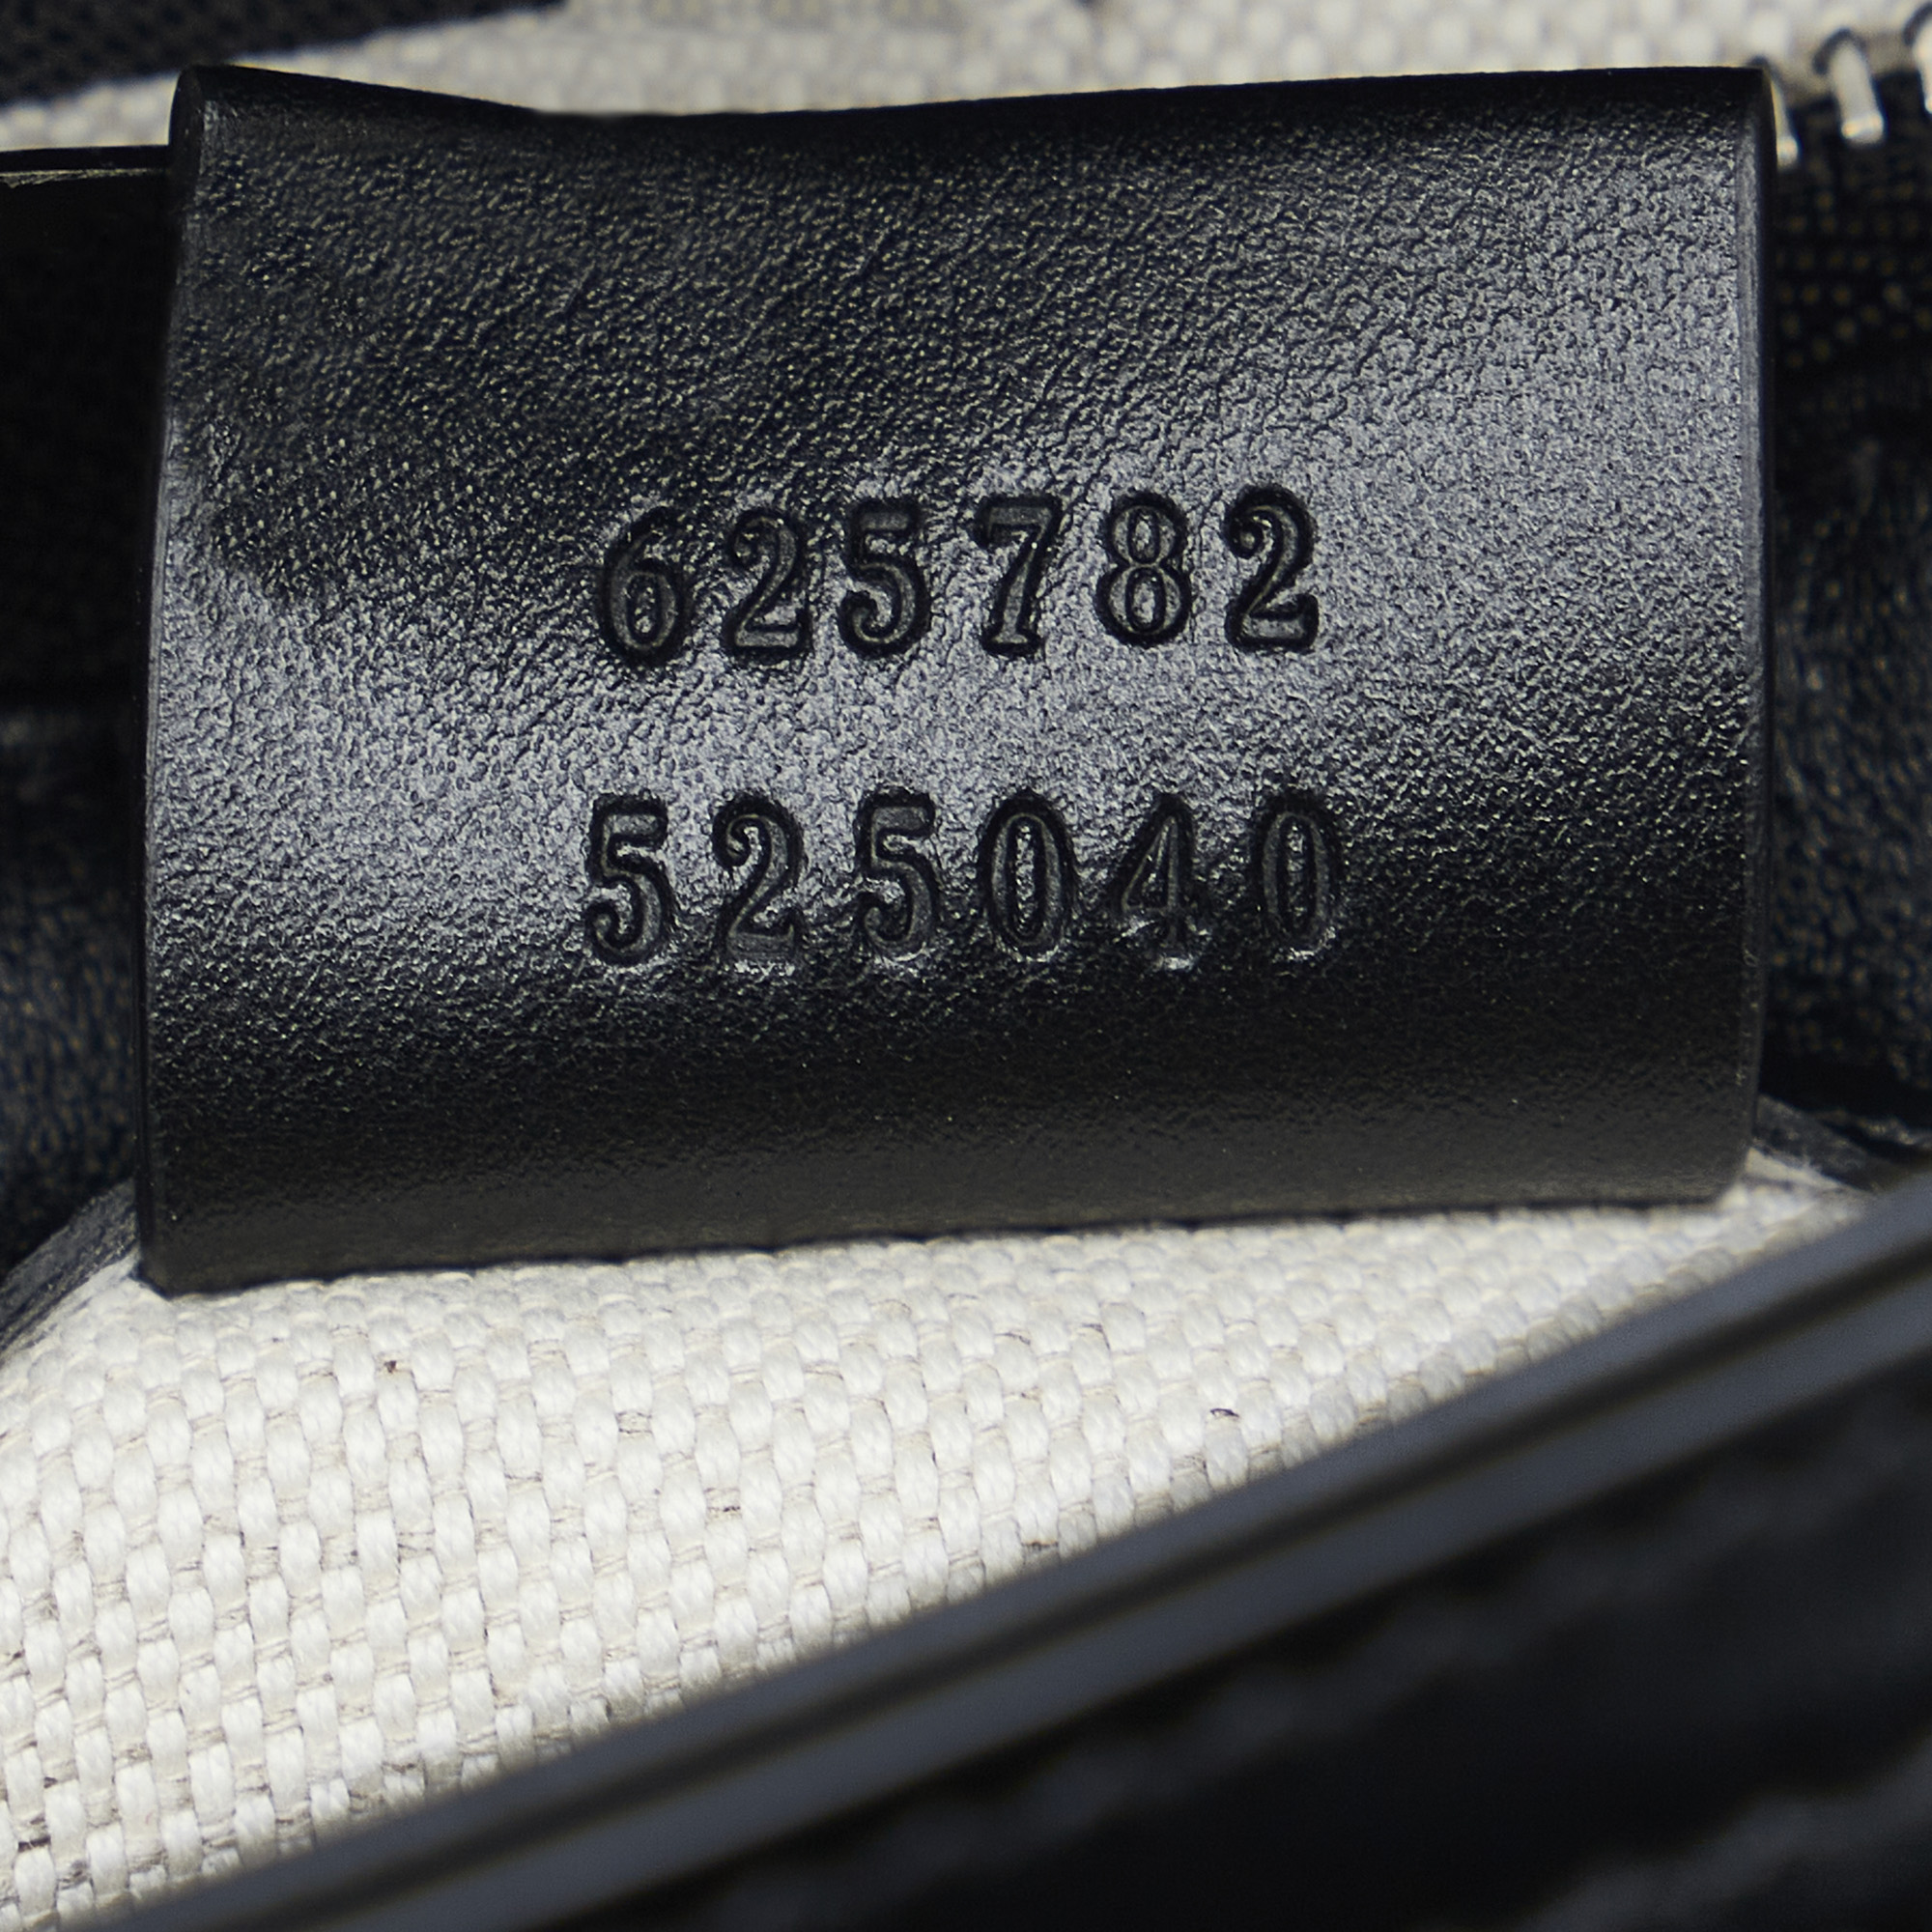 Gucci Black GG Embossed Perforated Messenger Bag